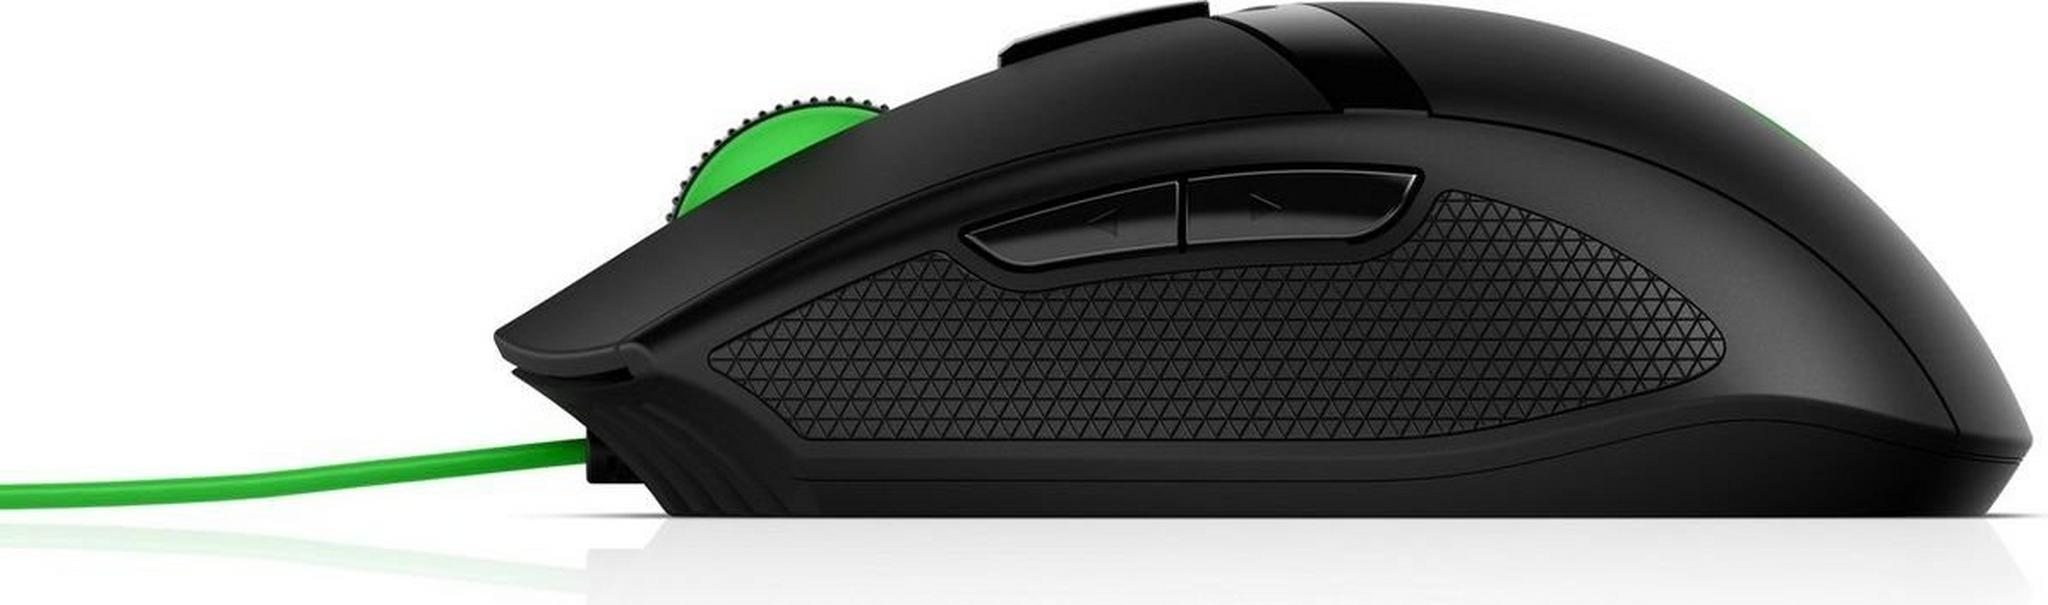 HP Pavilion Gaming Wired Mouse 300